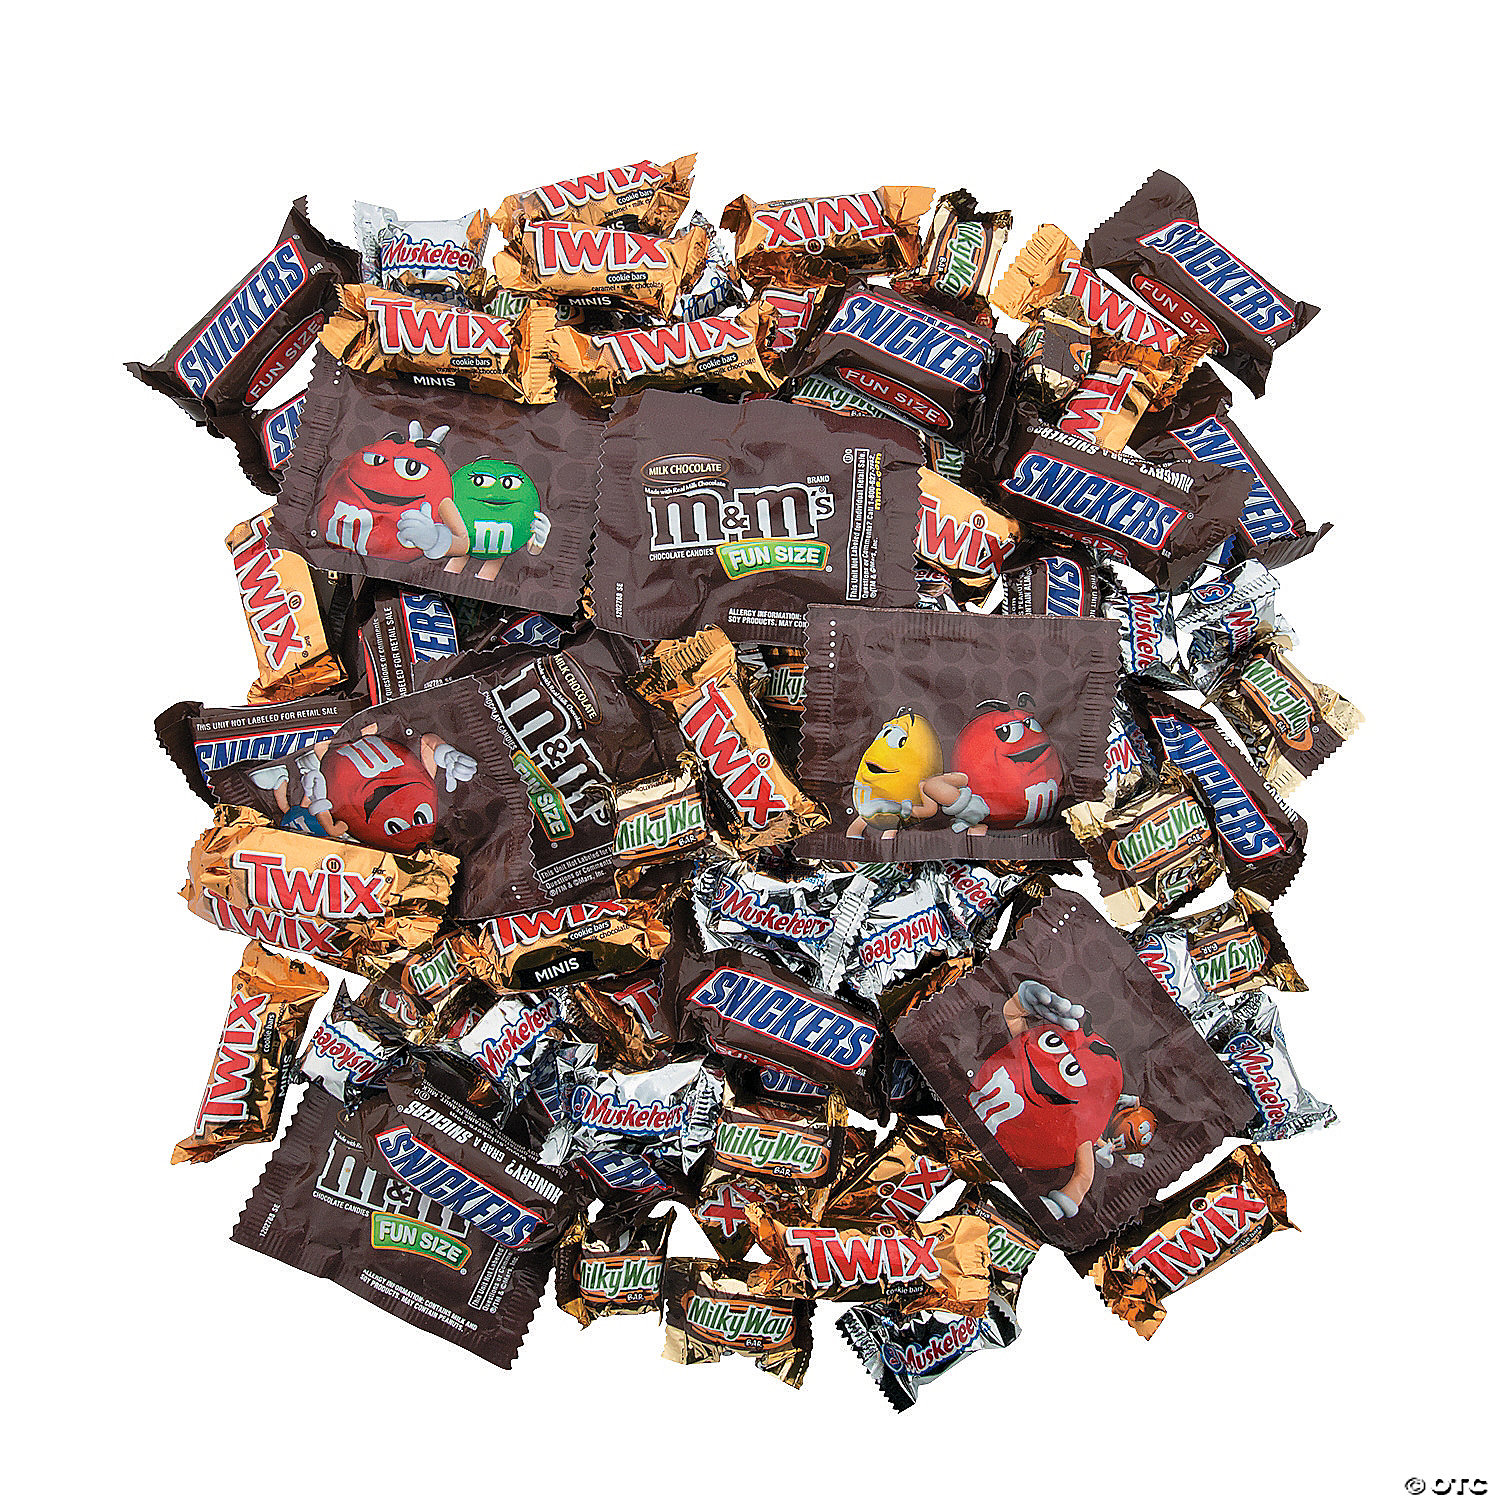 M&m's Chocolate Bag Icons PNG - Free PNG and Icons Downloads